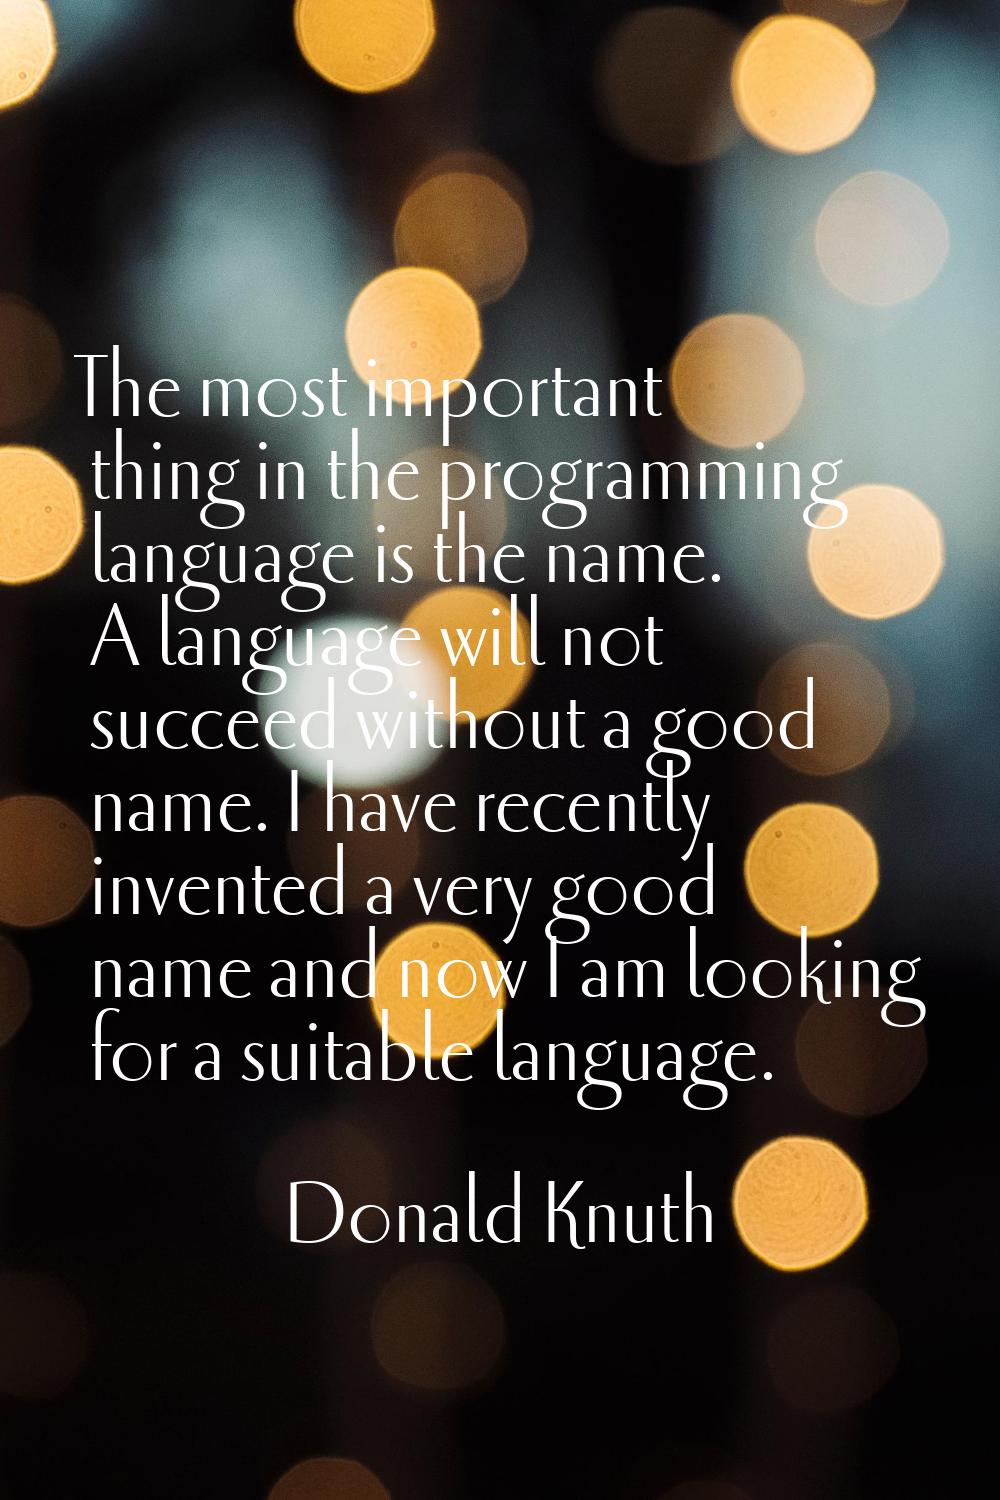 The most important thing in the programming language is the name. A language will not succeed witho